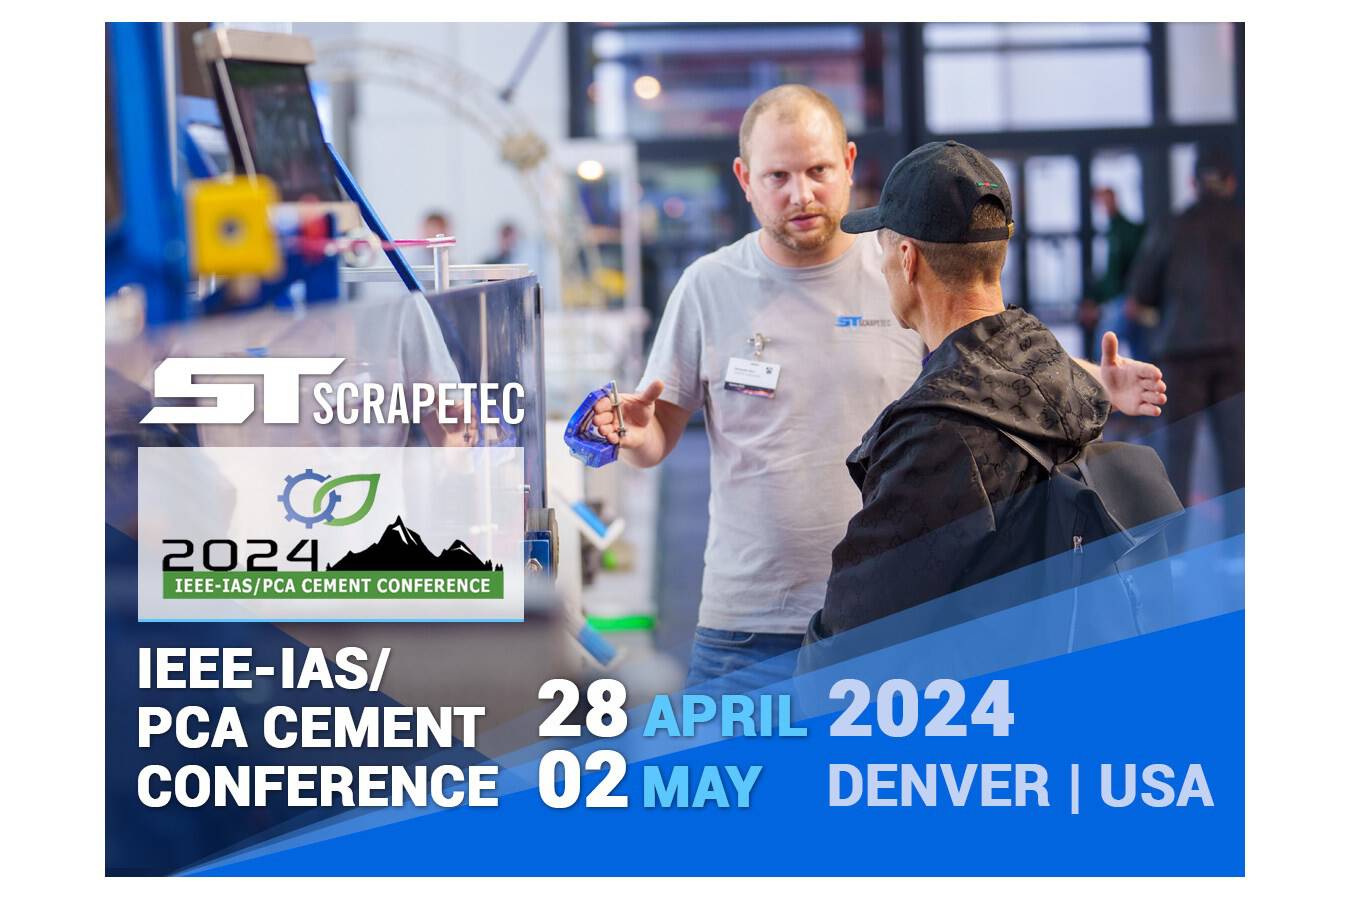 2024 IEEE-IAS/PCA Cement Conference with Scrapetec on board Scrapetec announces participation in 2024 IEEE-IAS/PCA Cement Conference. They will present their innovative DustScrape study aiming at efficiency and sustainability in the cement industry.